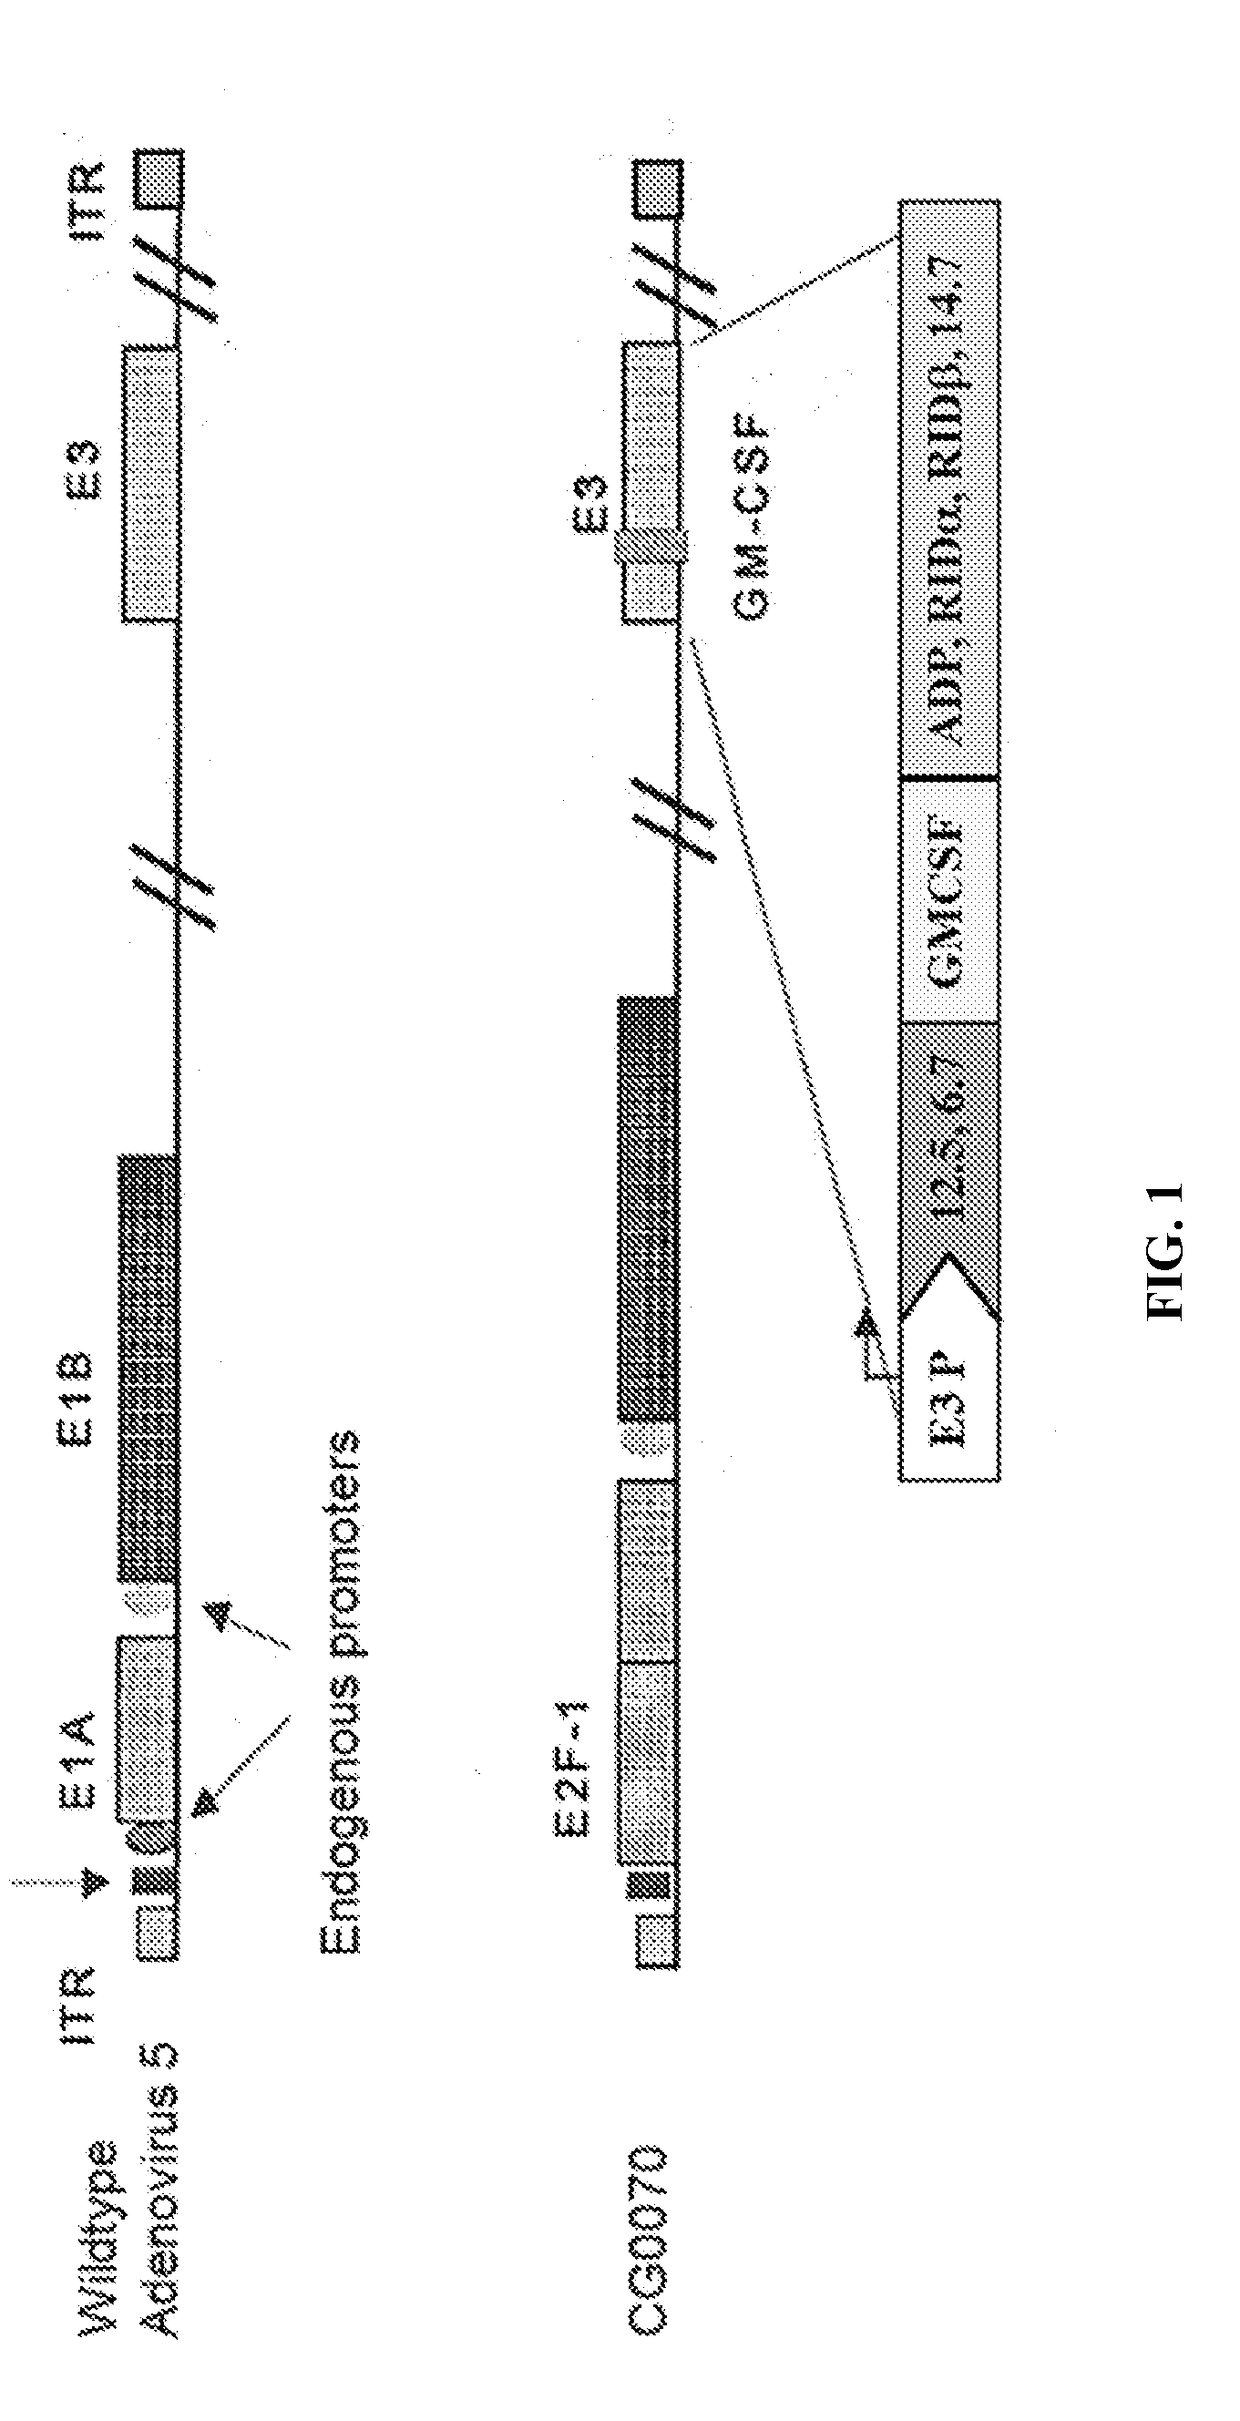 Methods of treating solid or lymphatic tumors by combination therapy